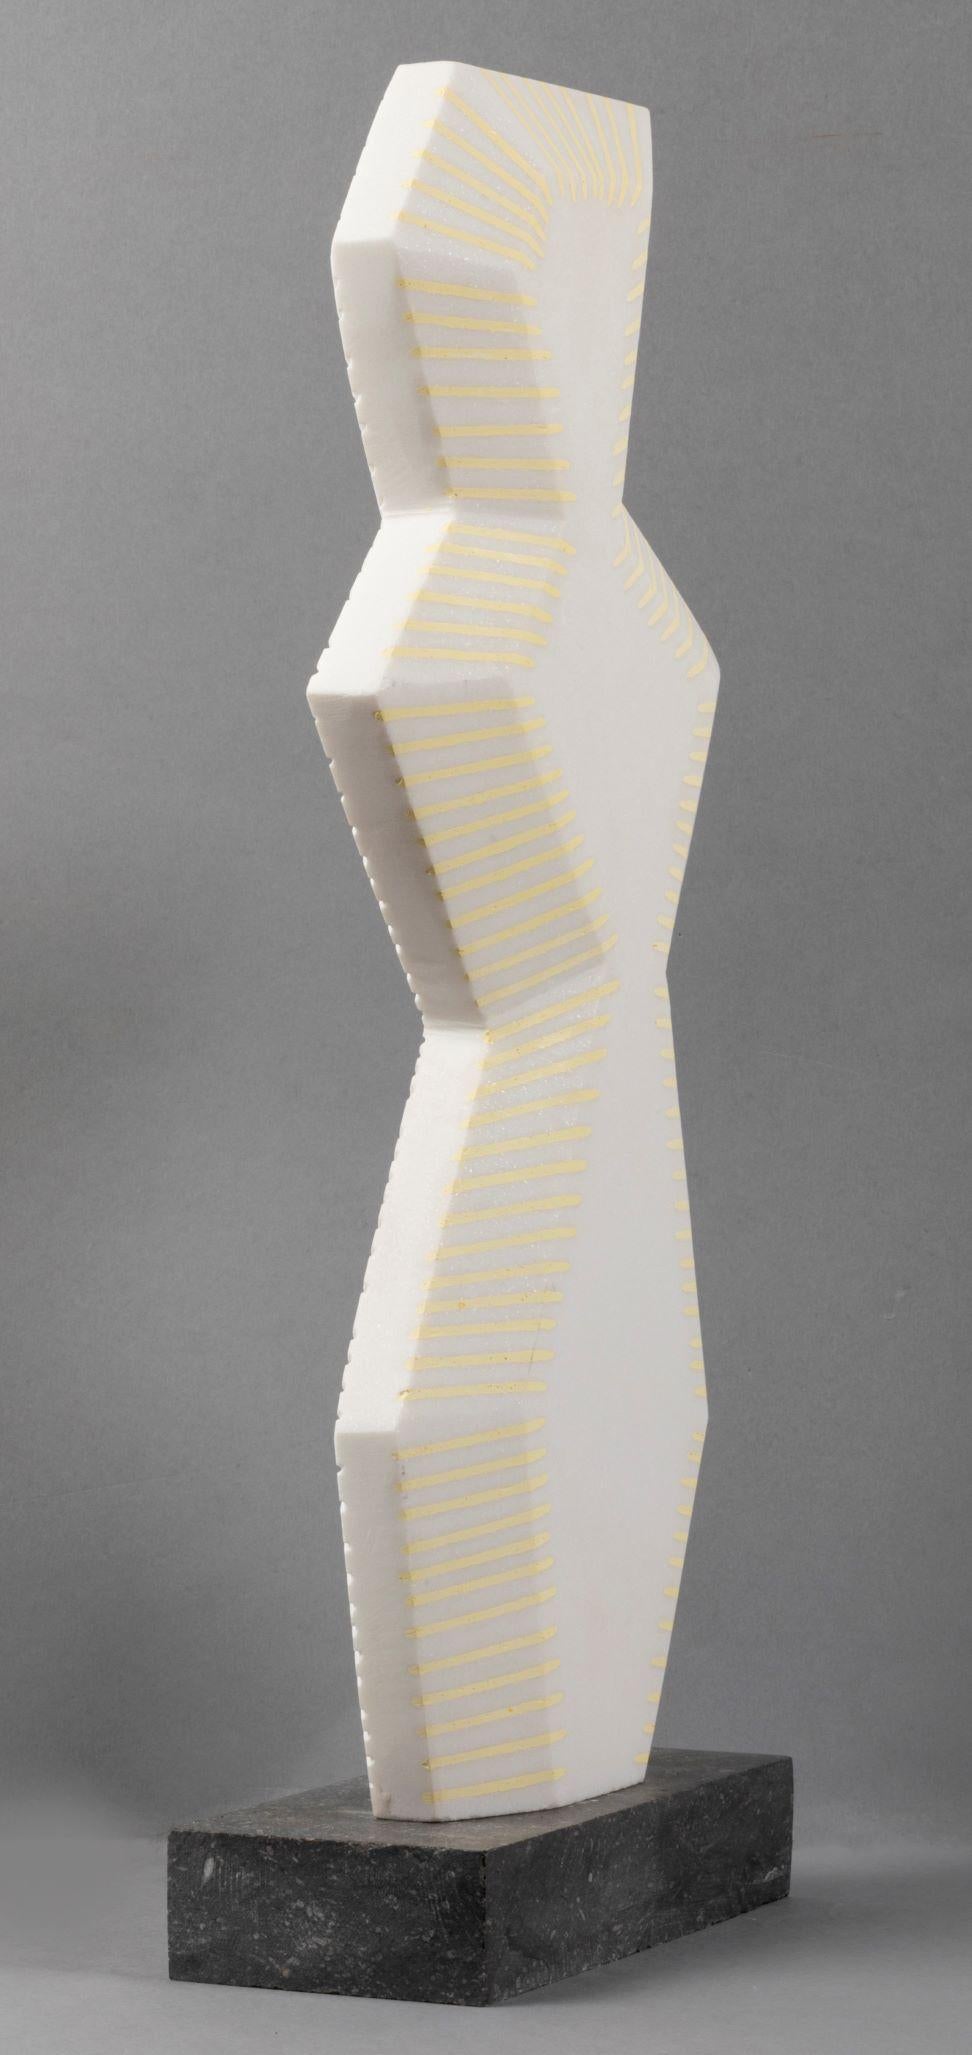 Hand-Carved One of a Kind White Carrara Marble Sculpture, 